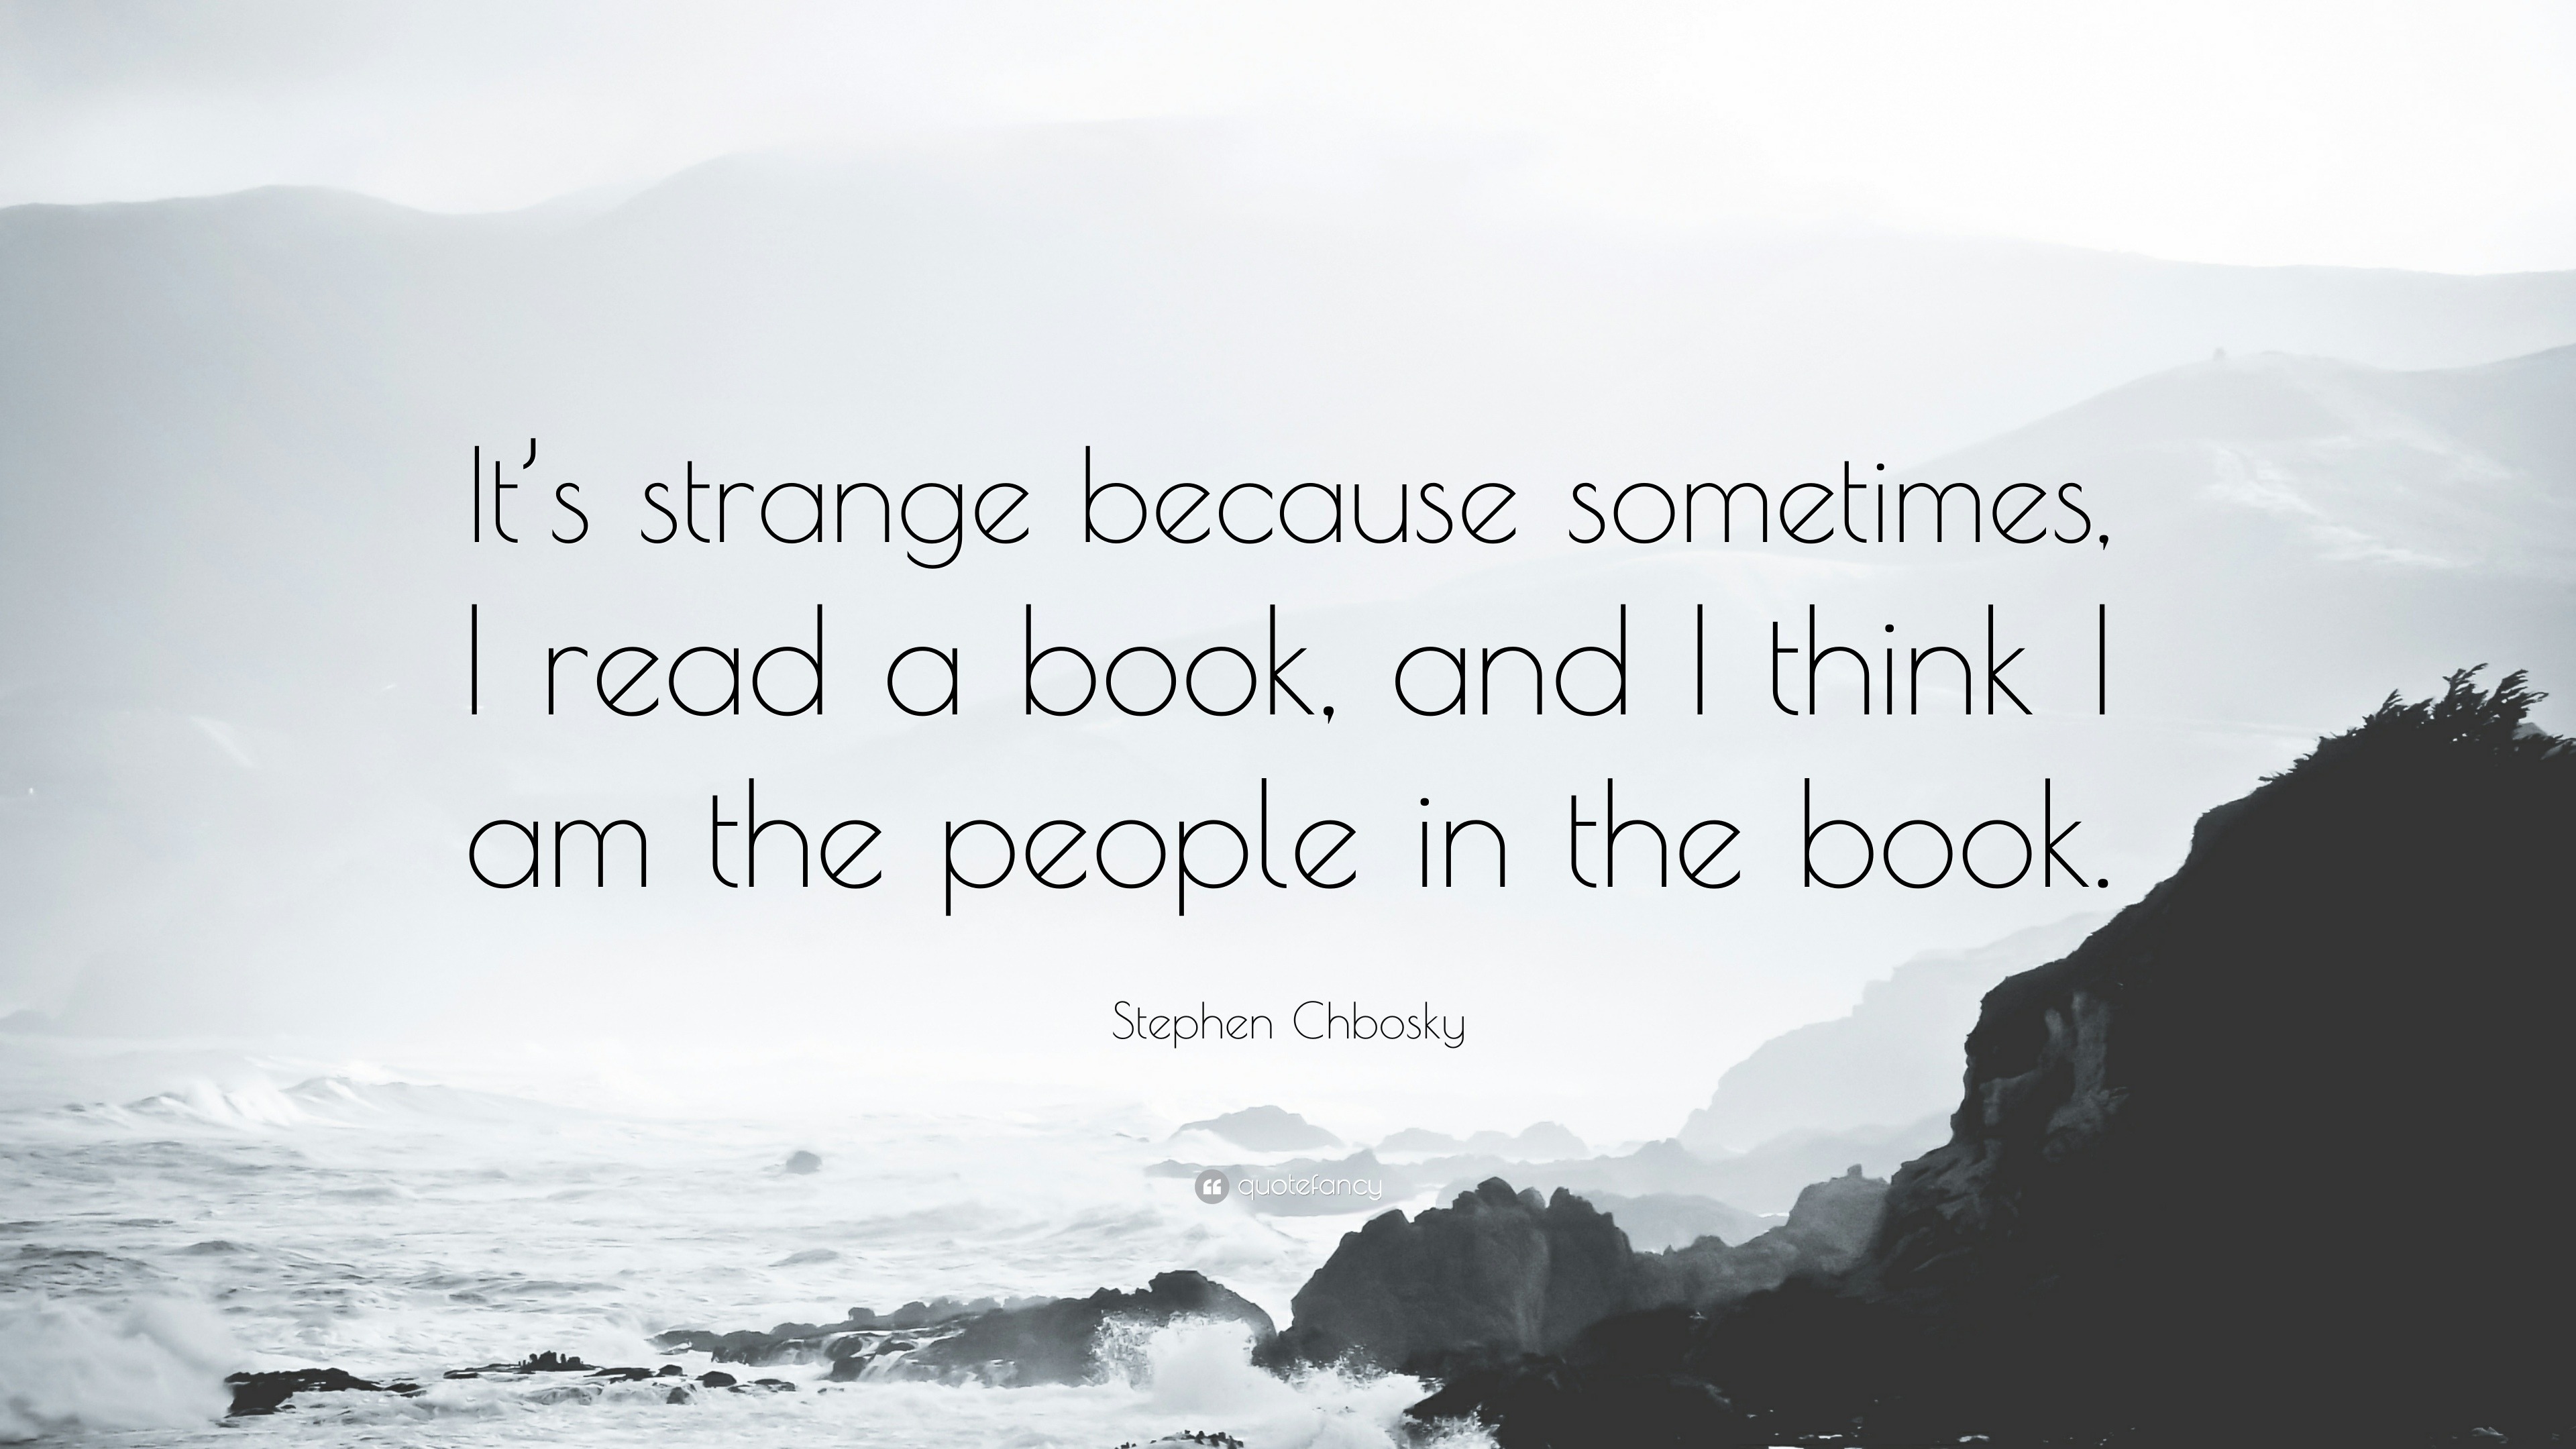 Stephen Chbosky Quote: “It’s strange because sometimes, I read a book ...